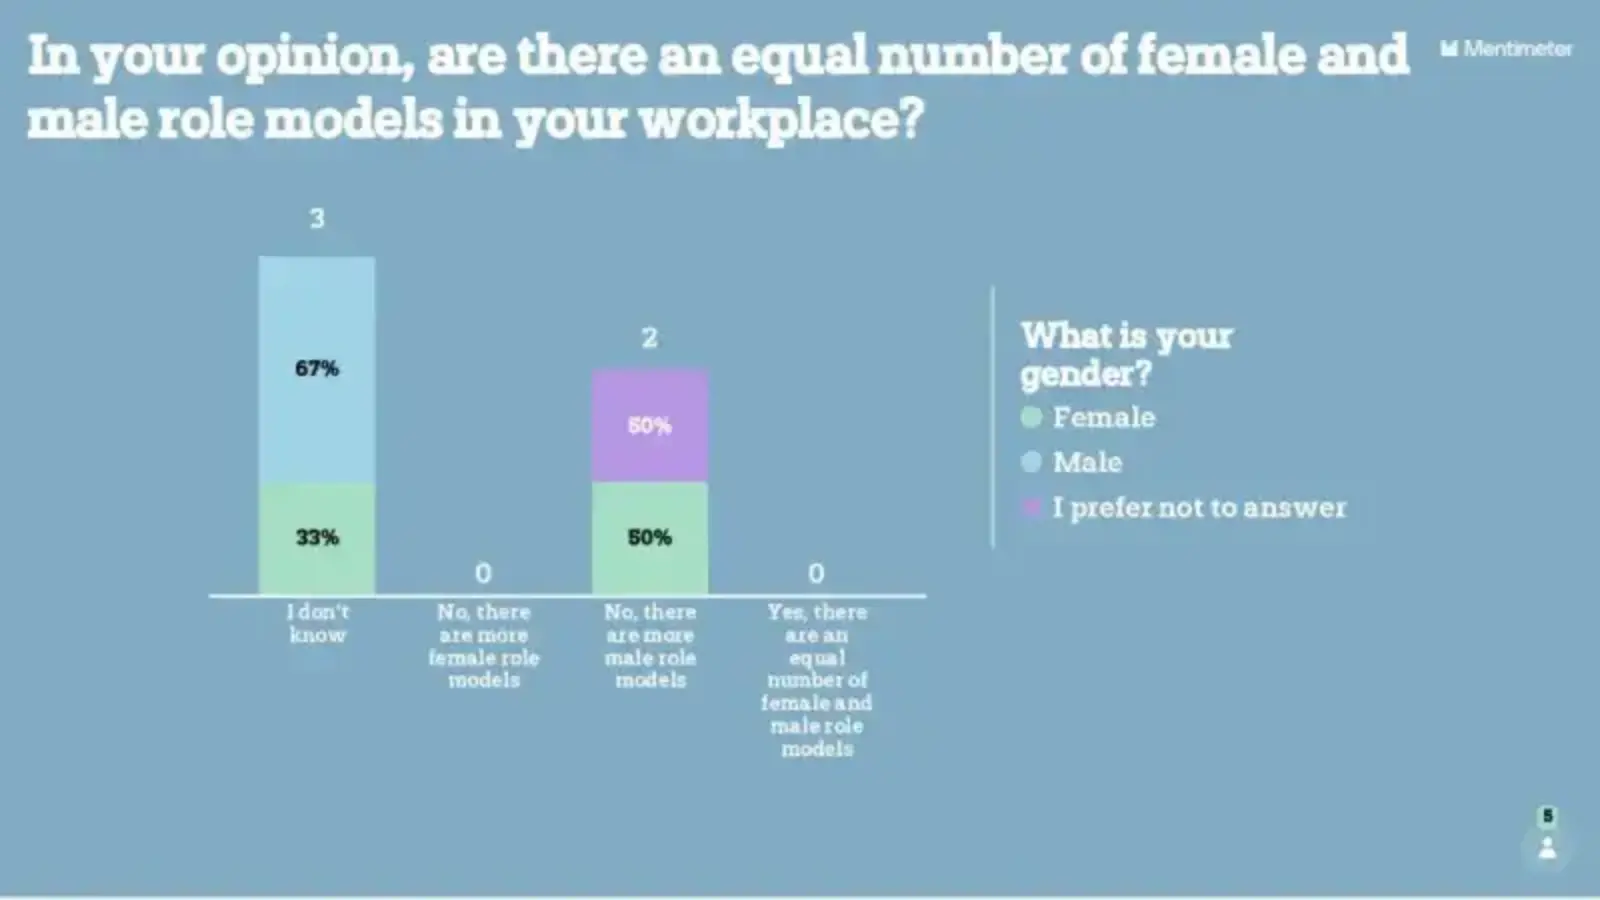 Gender and Role Models in the Workplace